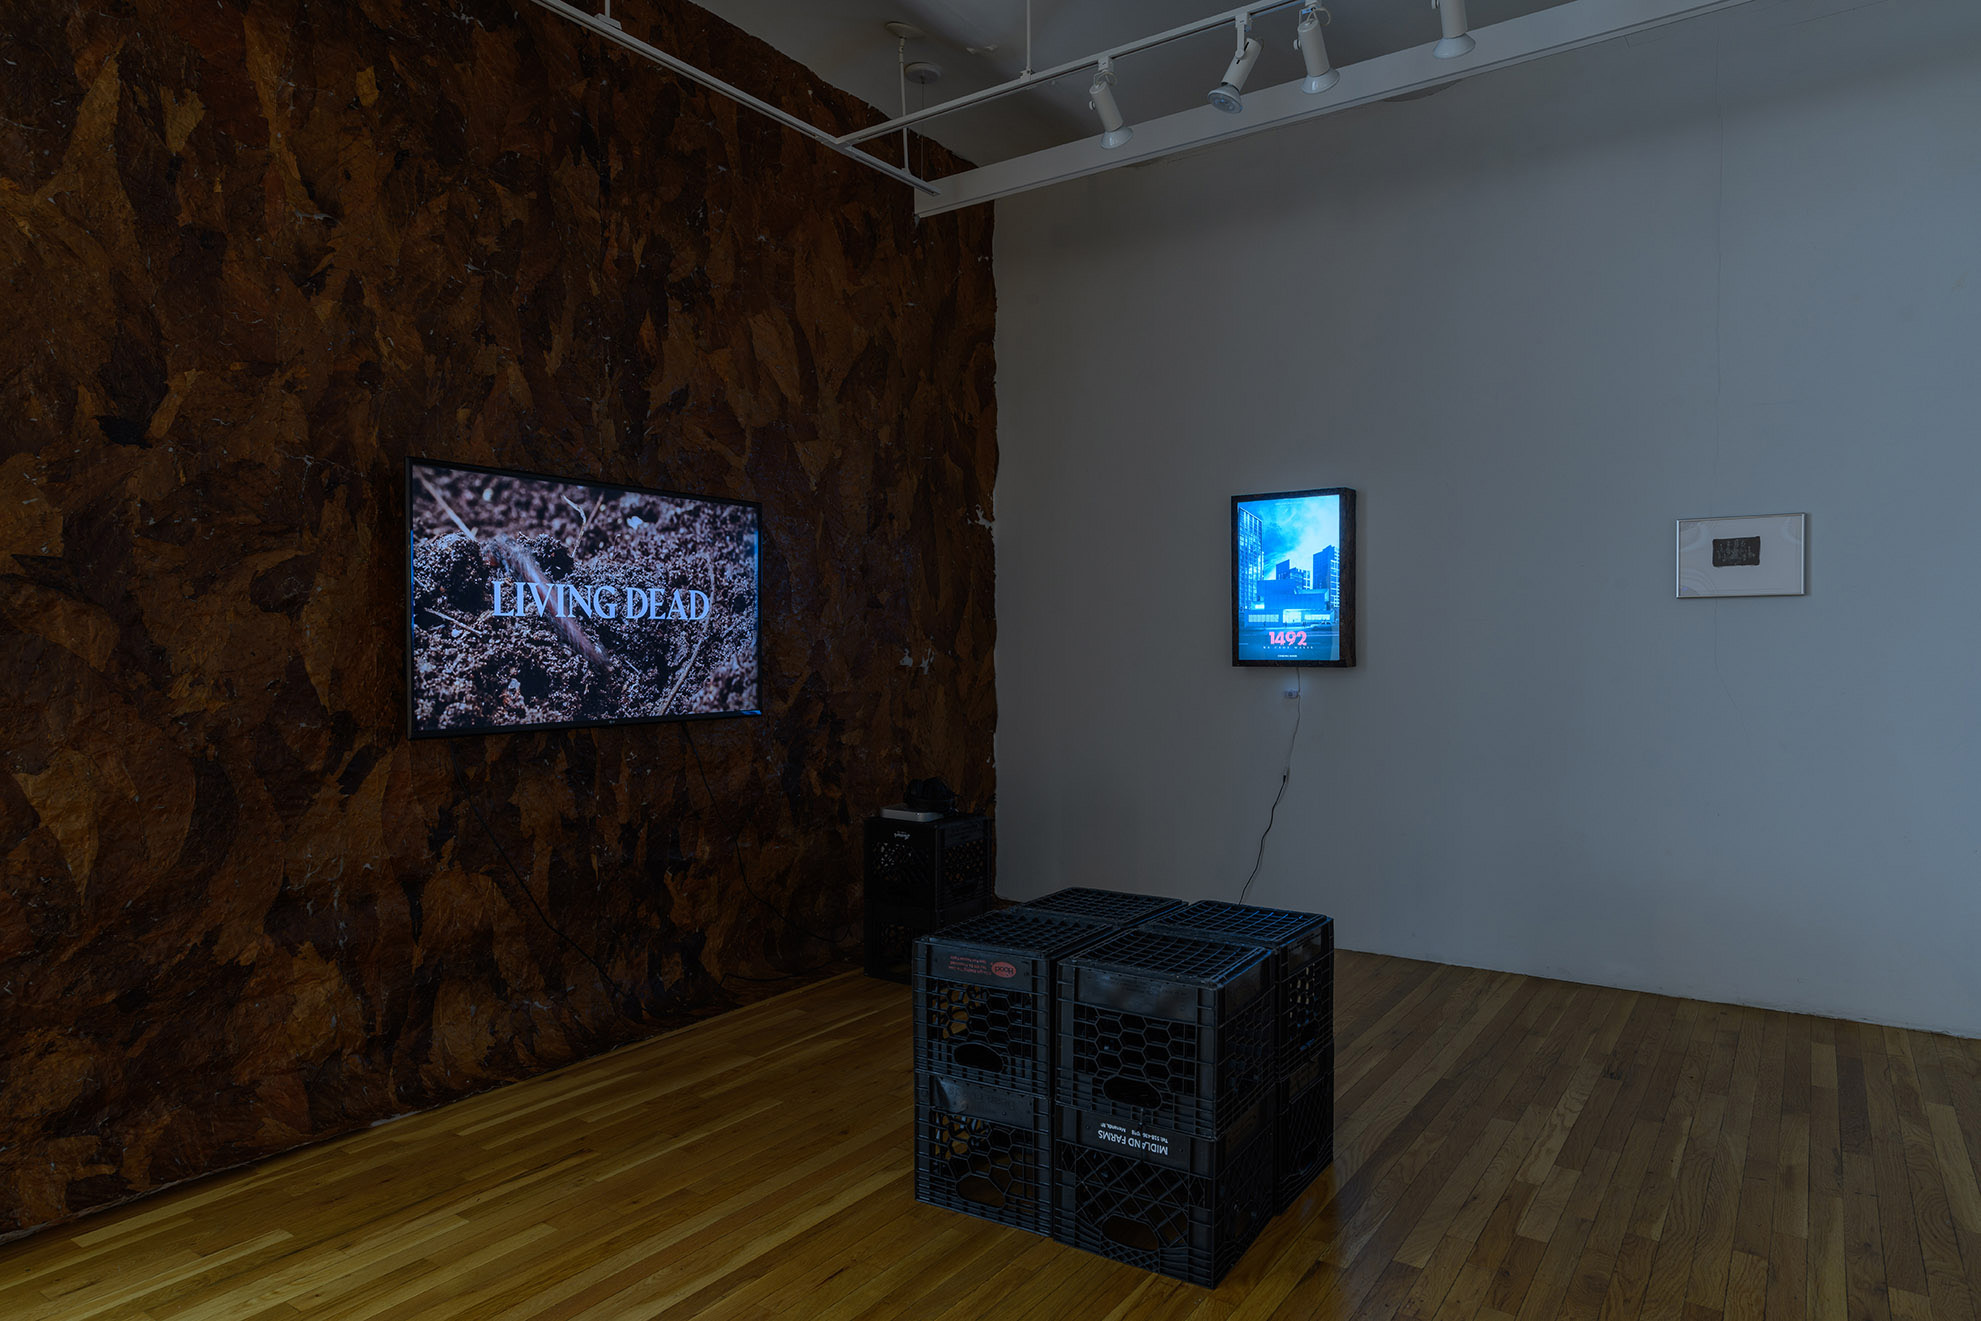 [An angled view of two adjoining walls forming a corner in the gallery. The wall to the left is covered in dried tobacco leaves and has a rectangular TV monitor hung in the center of it. The words “Living dead” in white capital letters read across the monitor’s screen on top of what looks like video footage of loose soil and roots. The wall to the right is painted white and has a rectangular lightbox hanging vertically in the center of it. The lightbox has a blueish, grainy photographic image on it with the number “1492” overlaid in red font. On the gallery’s wooden floor, a sculpture made of 8 black milk crates, four on top of four provides a place to sit while experiencing the artworks.]